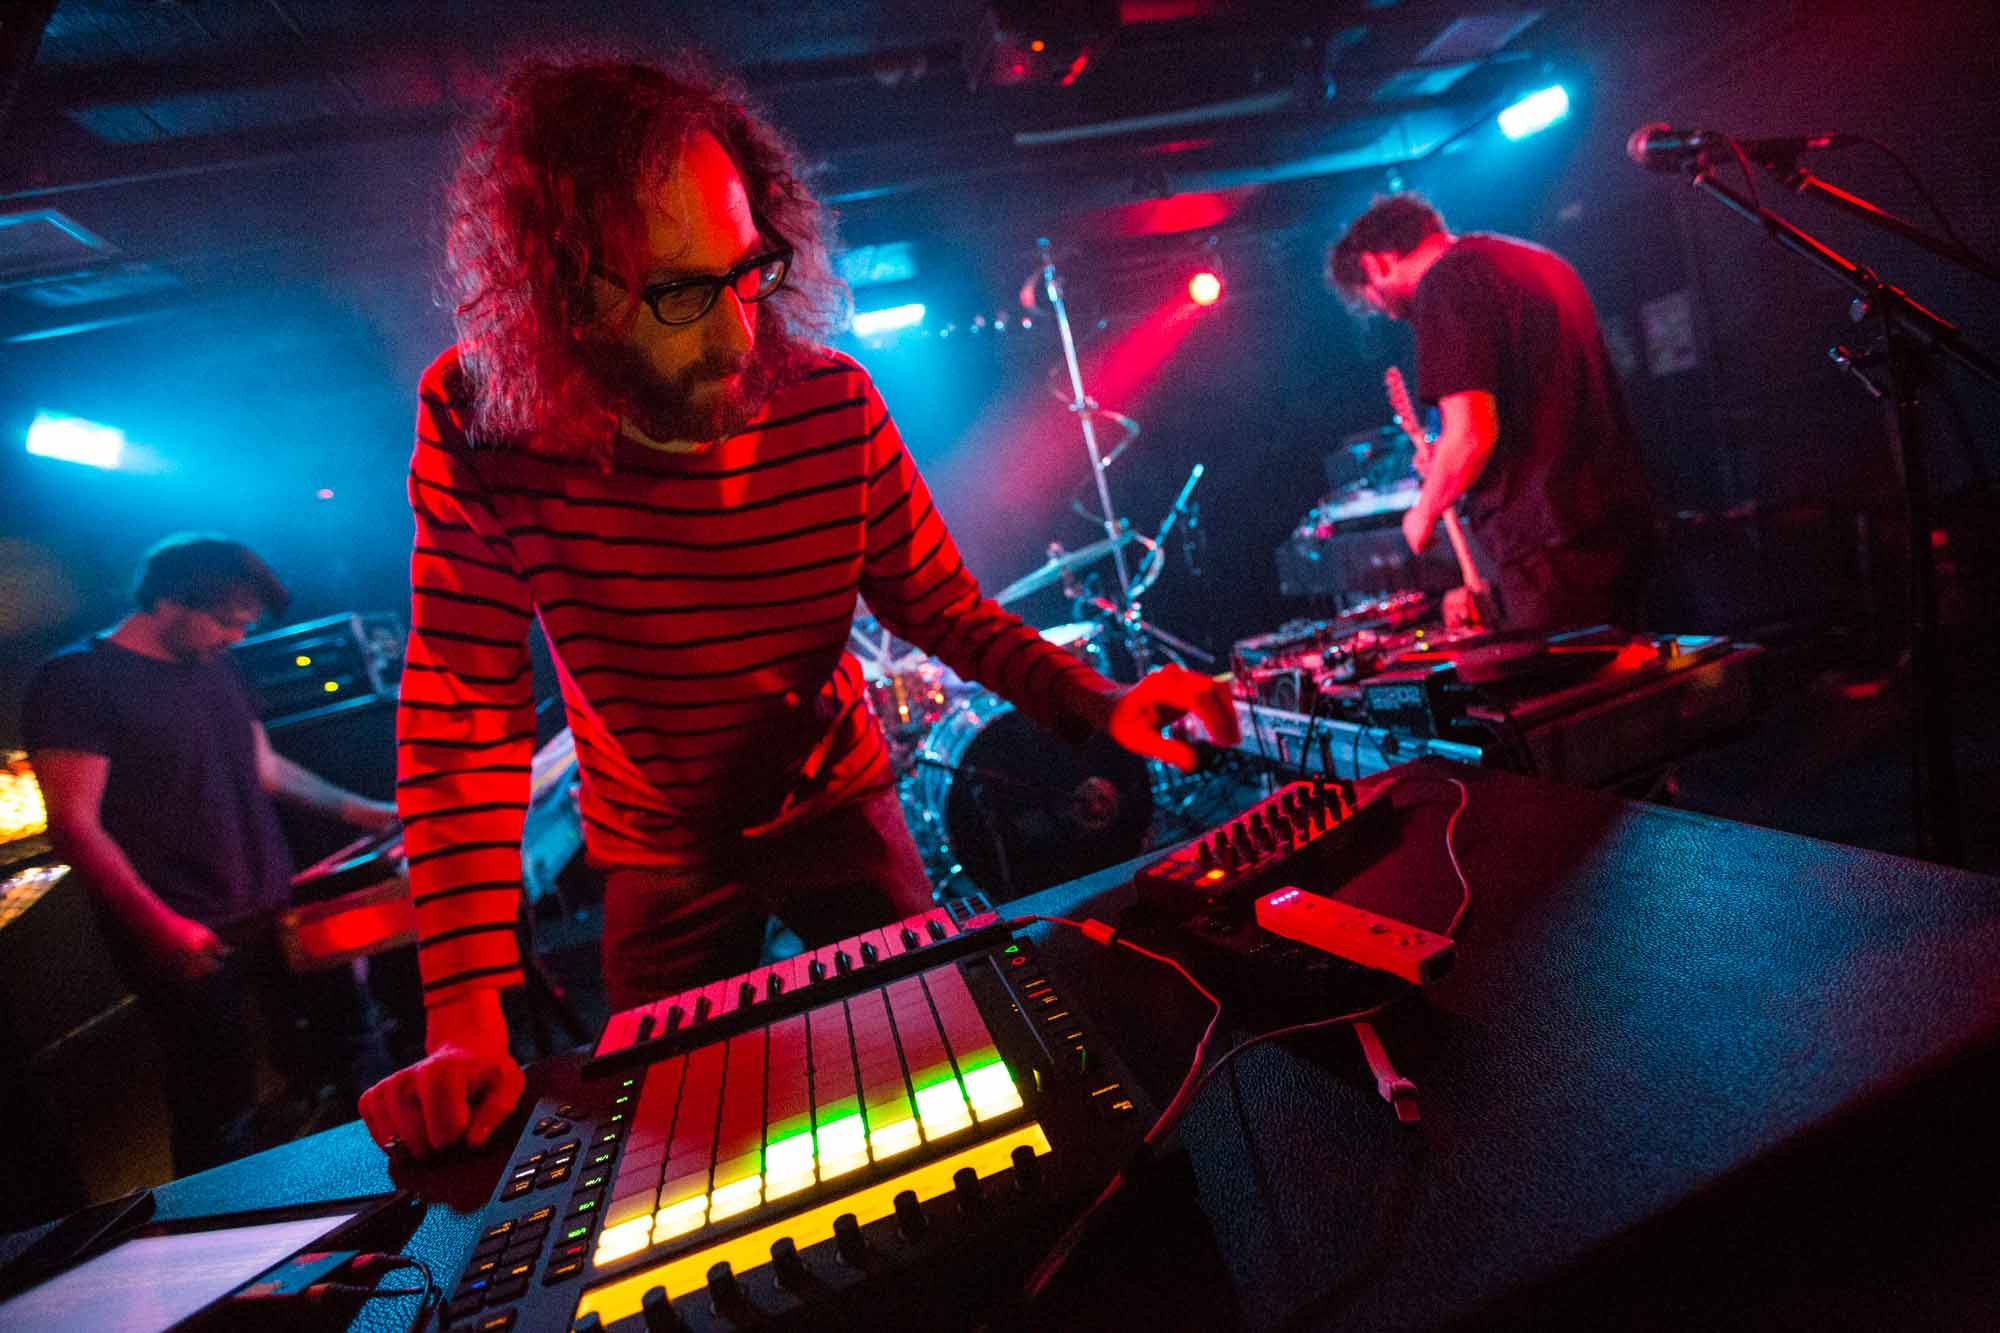 The Notwist at the Biltmore Cabaret, Vancouver, July 4 2014. Kirk Chantraine photo.